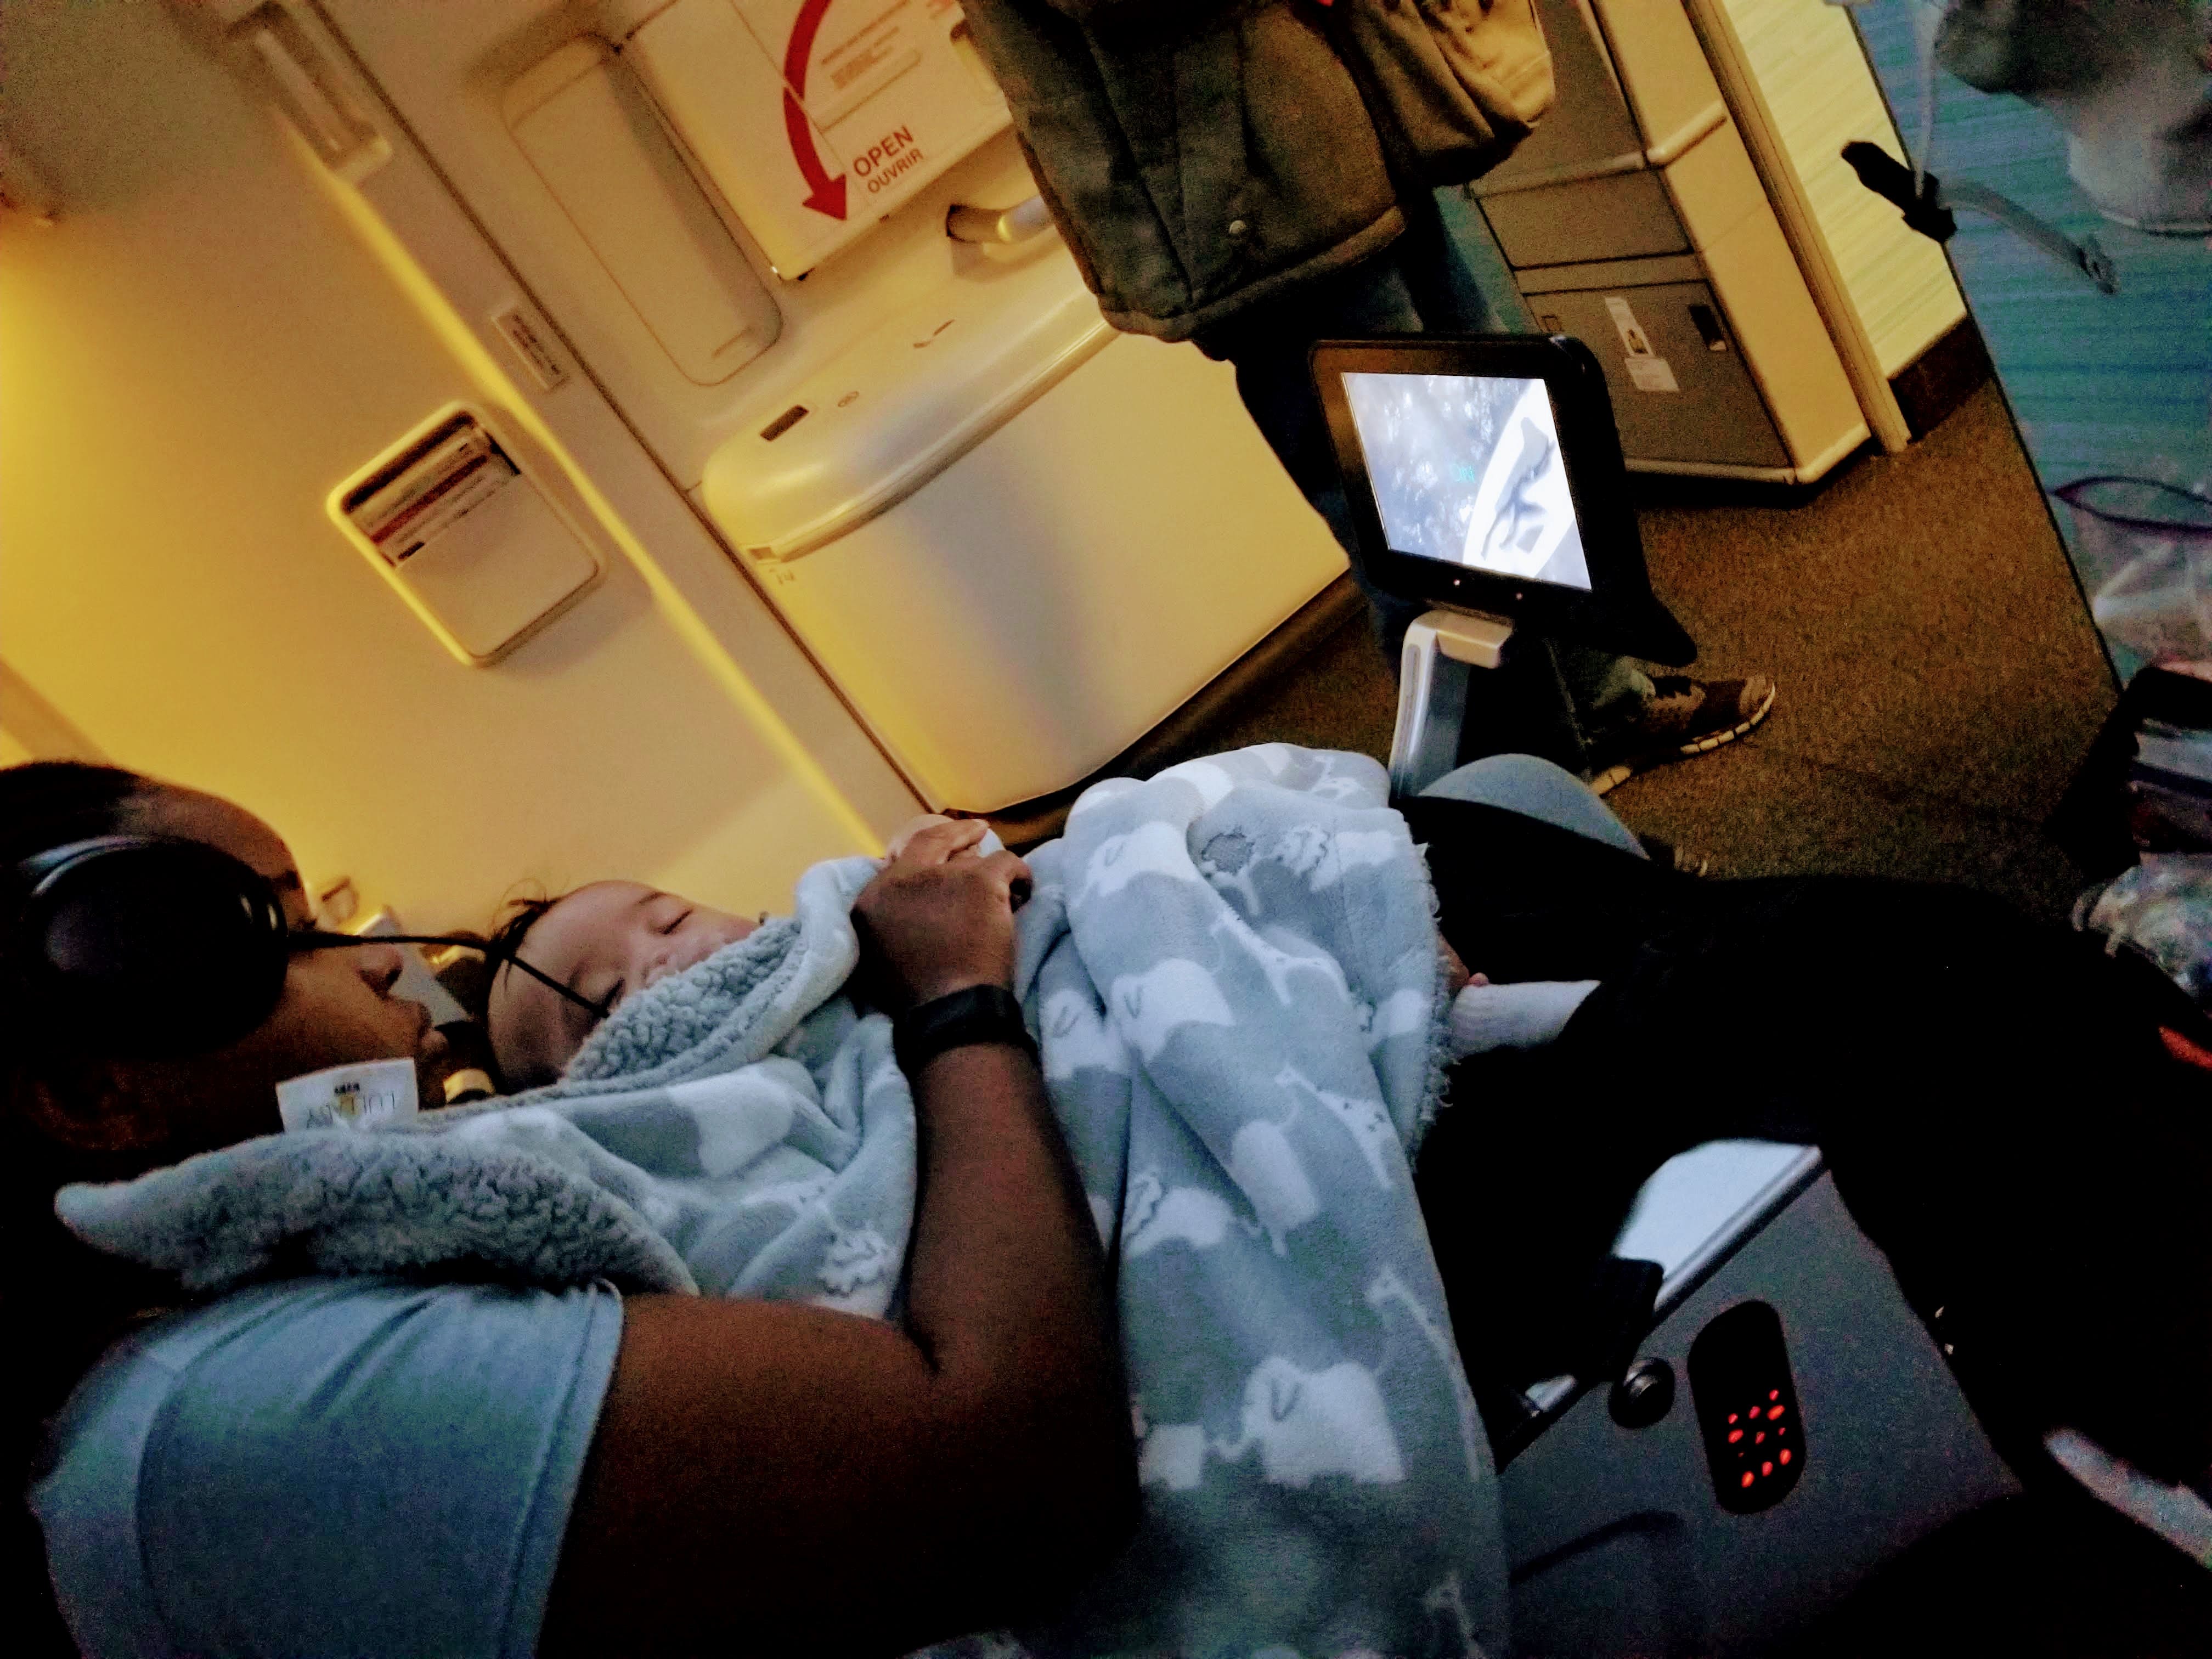 woman with baby on plane seat watching TV